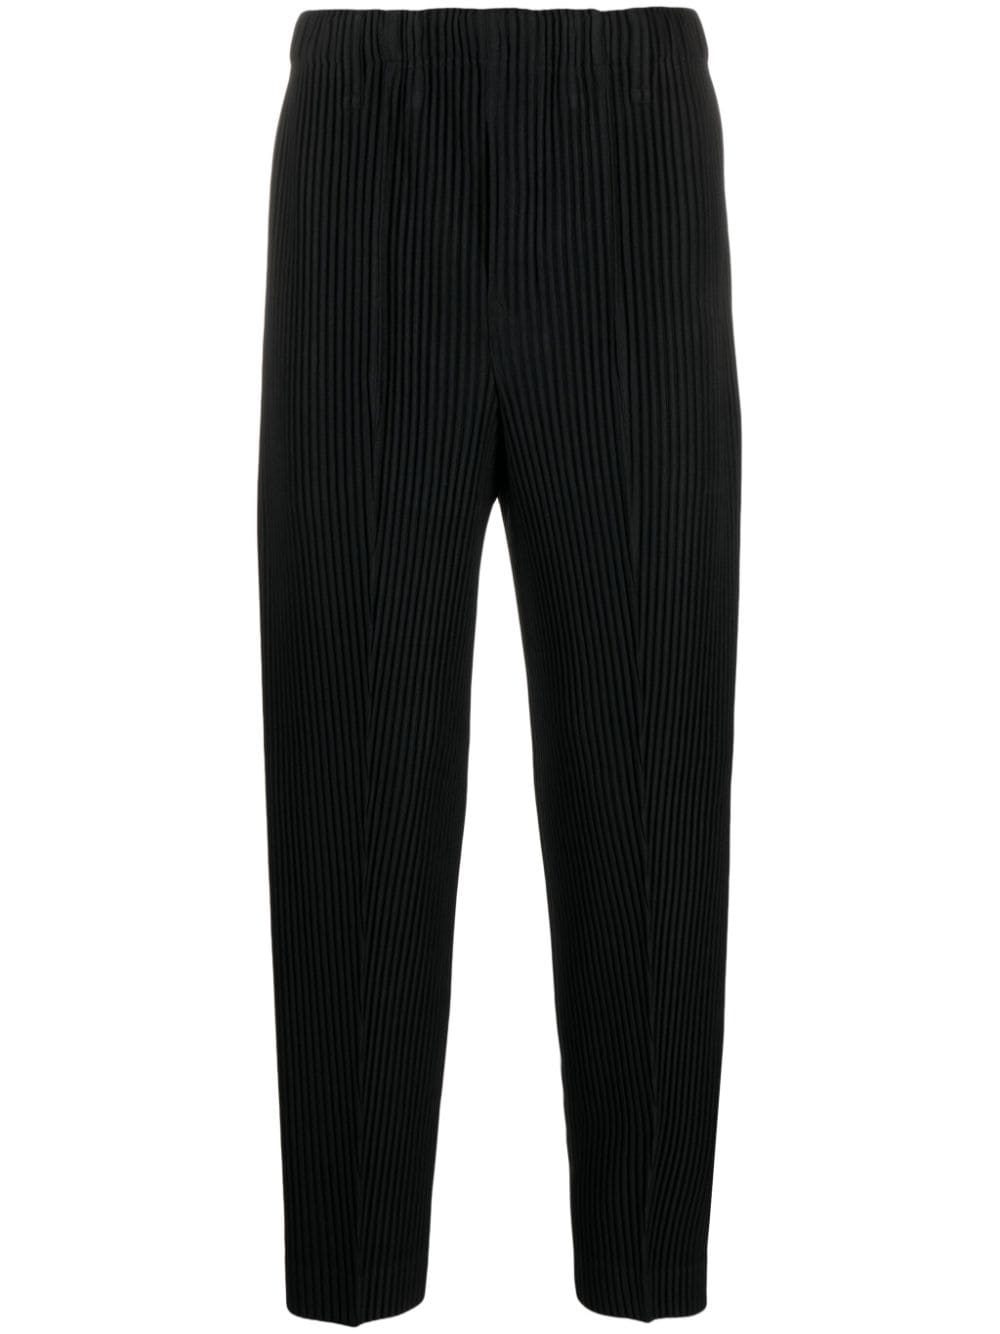 Homme Plissé Issey Miyake high-waisted pleated trousers - Black von Homme Plissé Issey Miyake